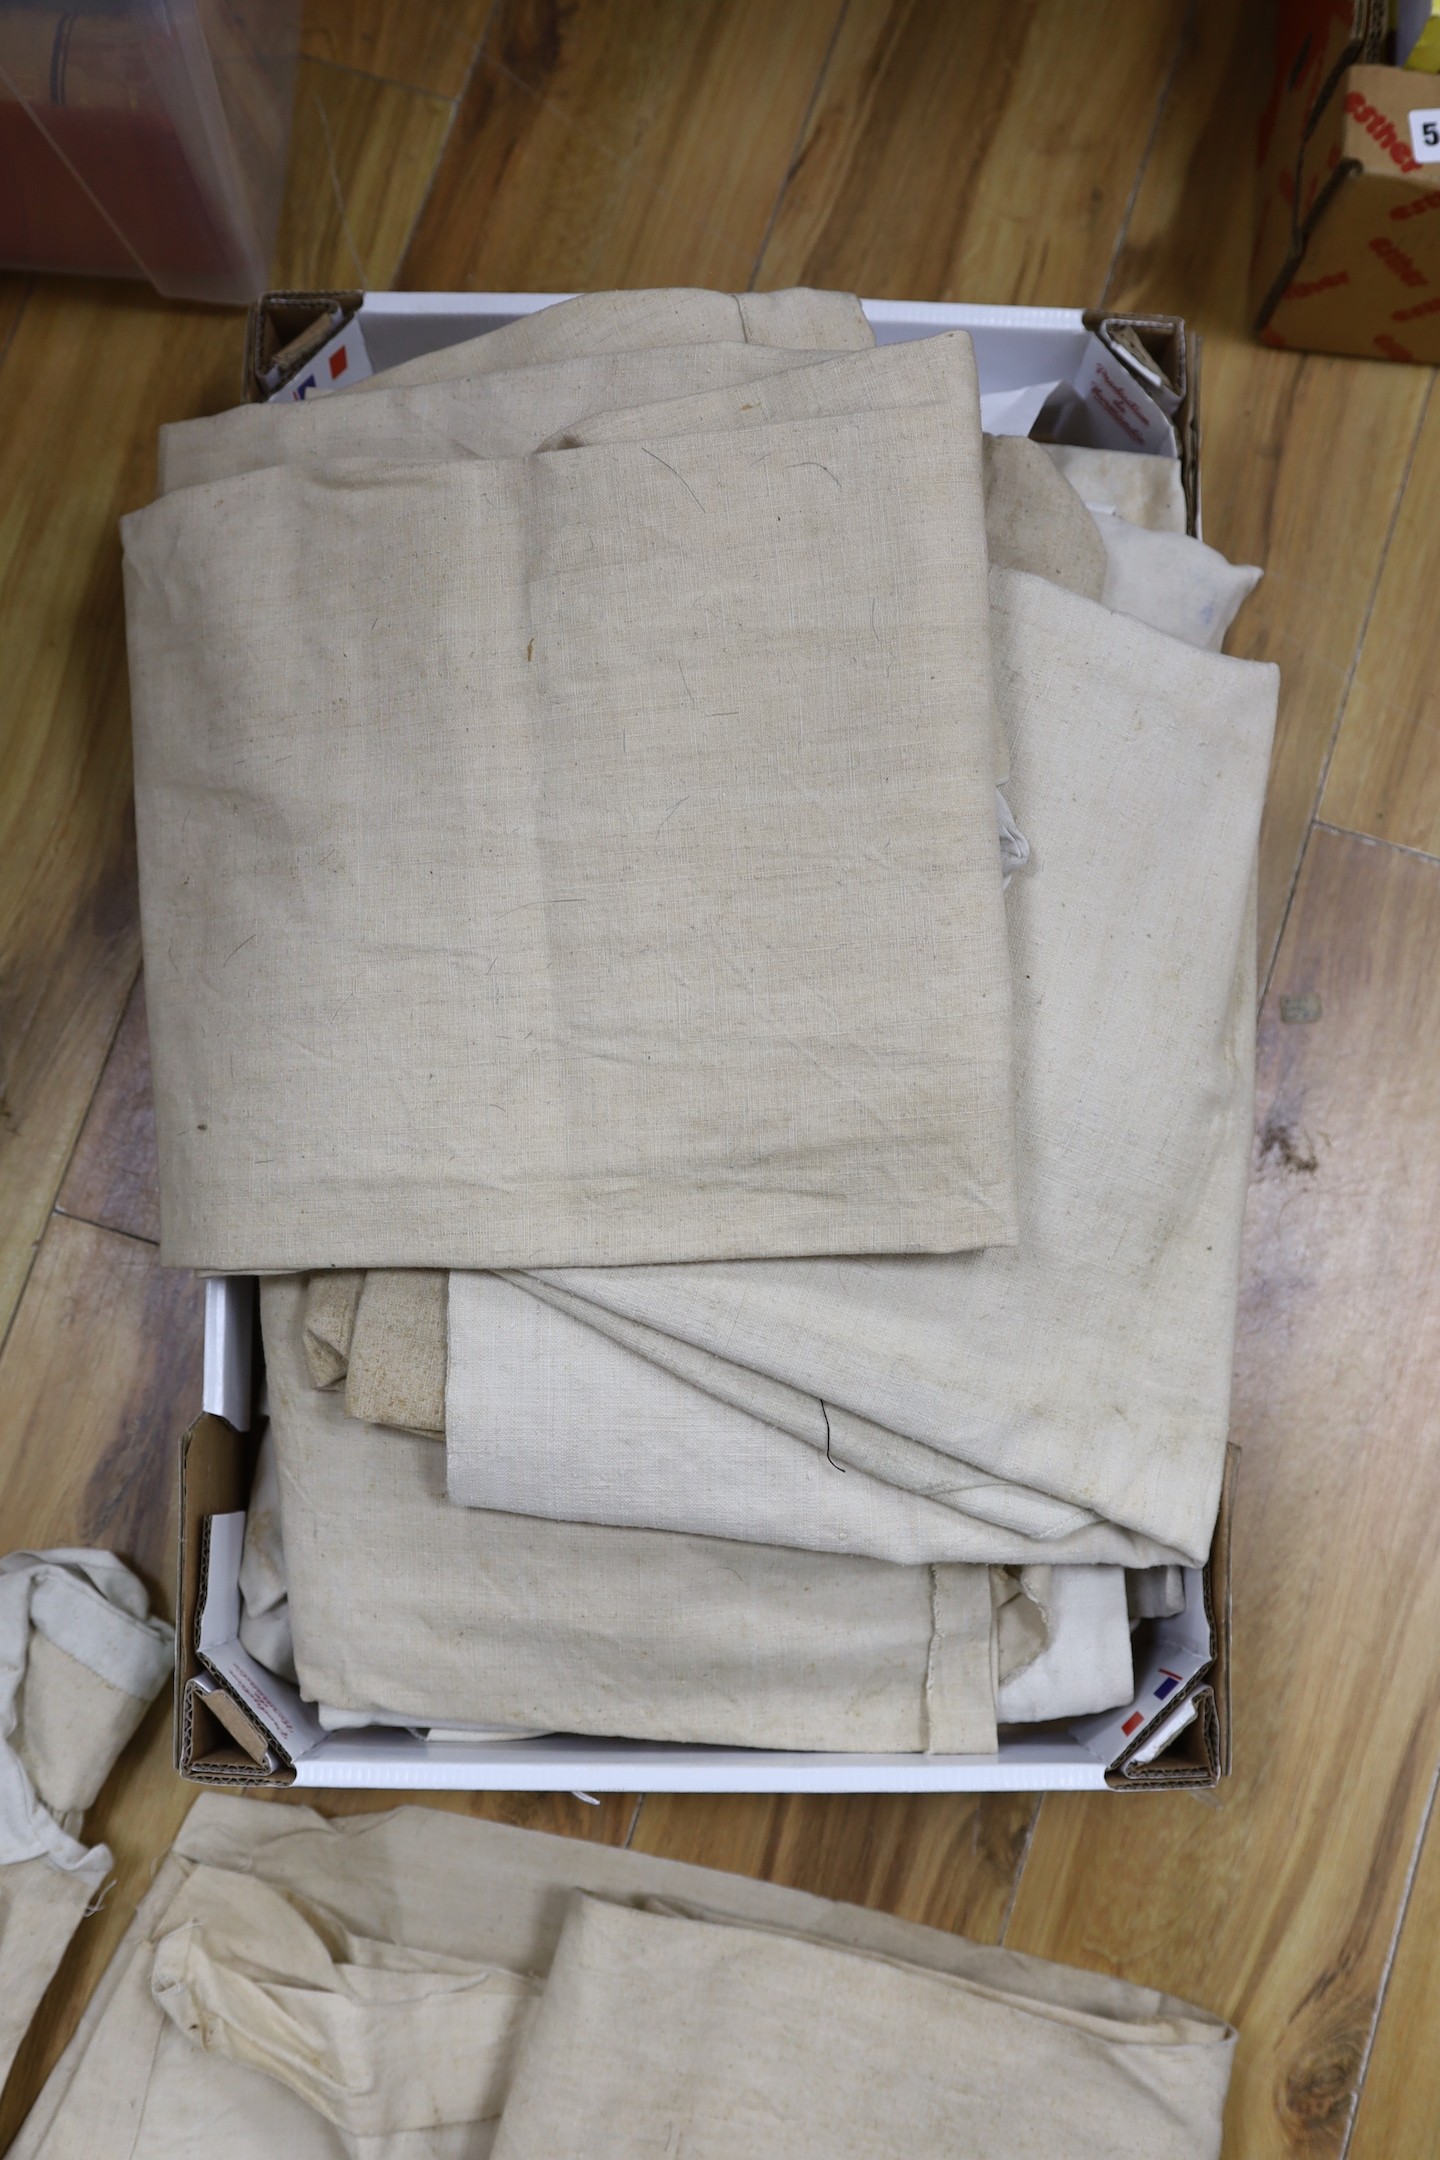 Twelve French provincial linen farm workers' shirts (5 unfinished)